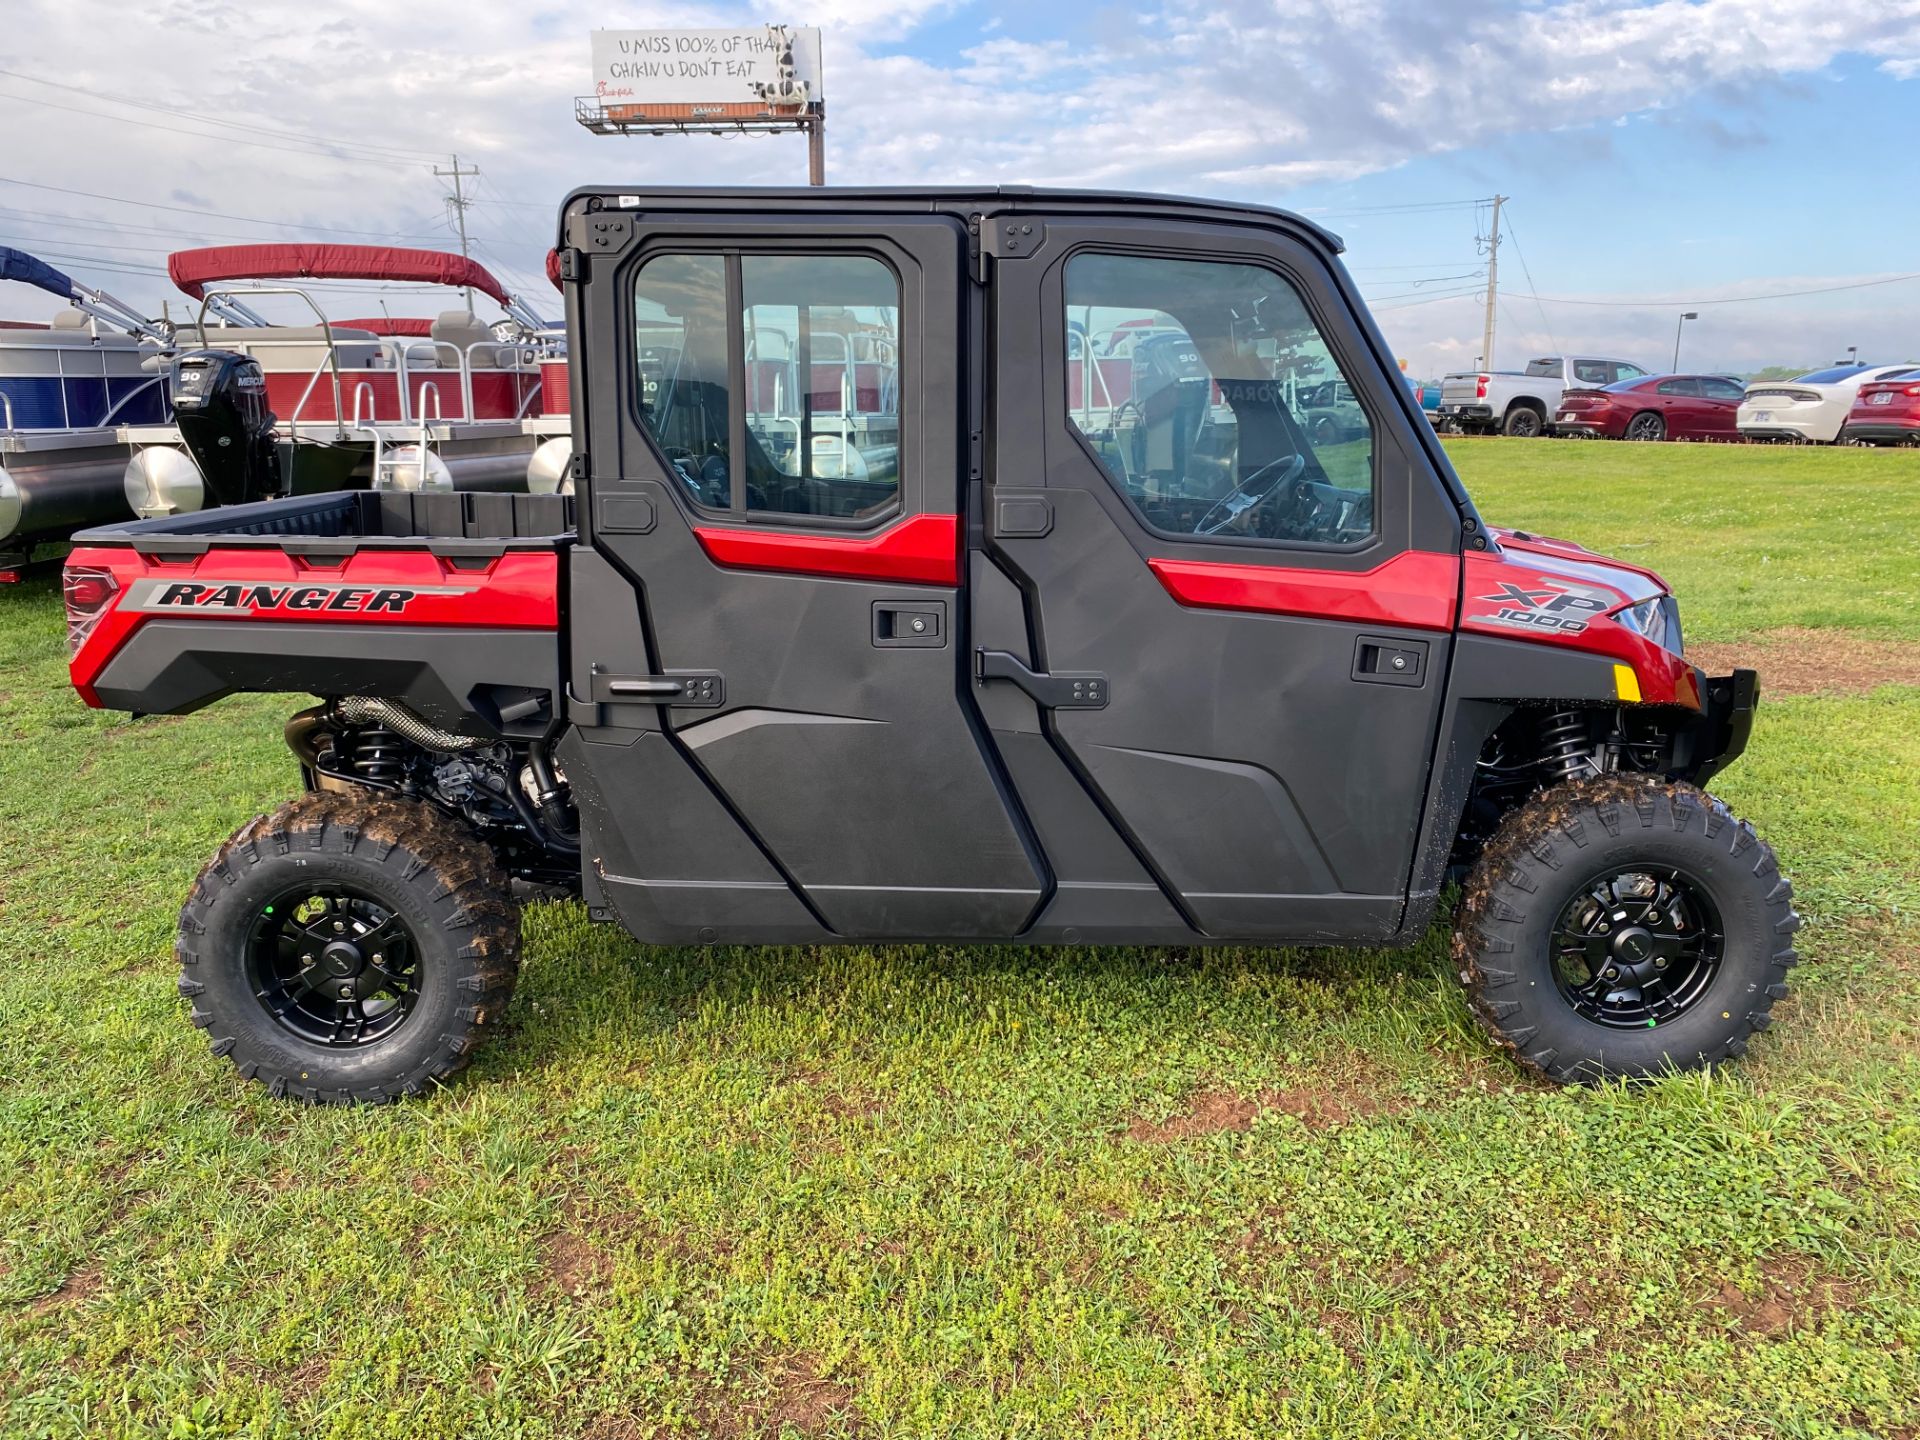 2025 Polaris Ranger Crew XP 1000 NorthStar Edition Ultimate in Ooltewah, Tennessee - Photo 3